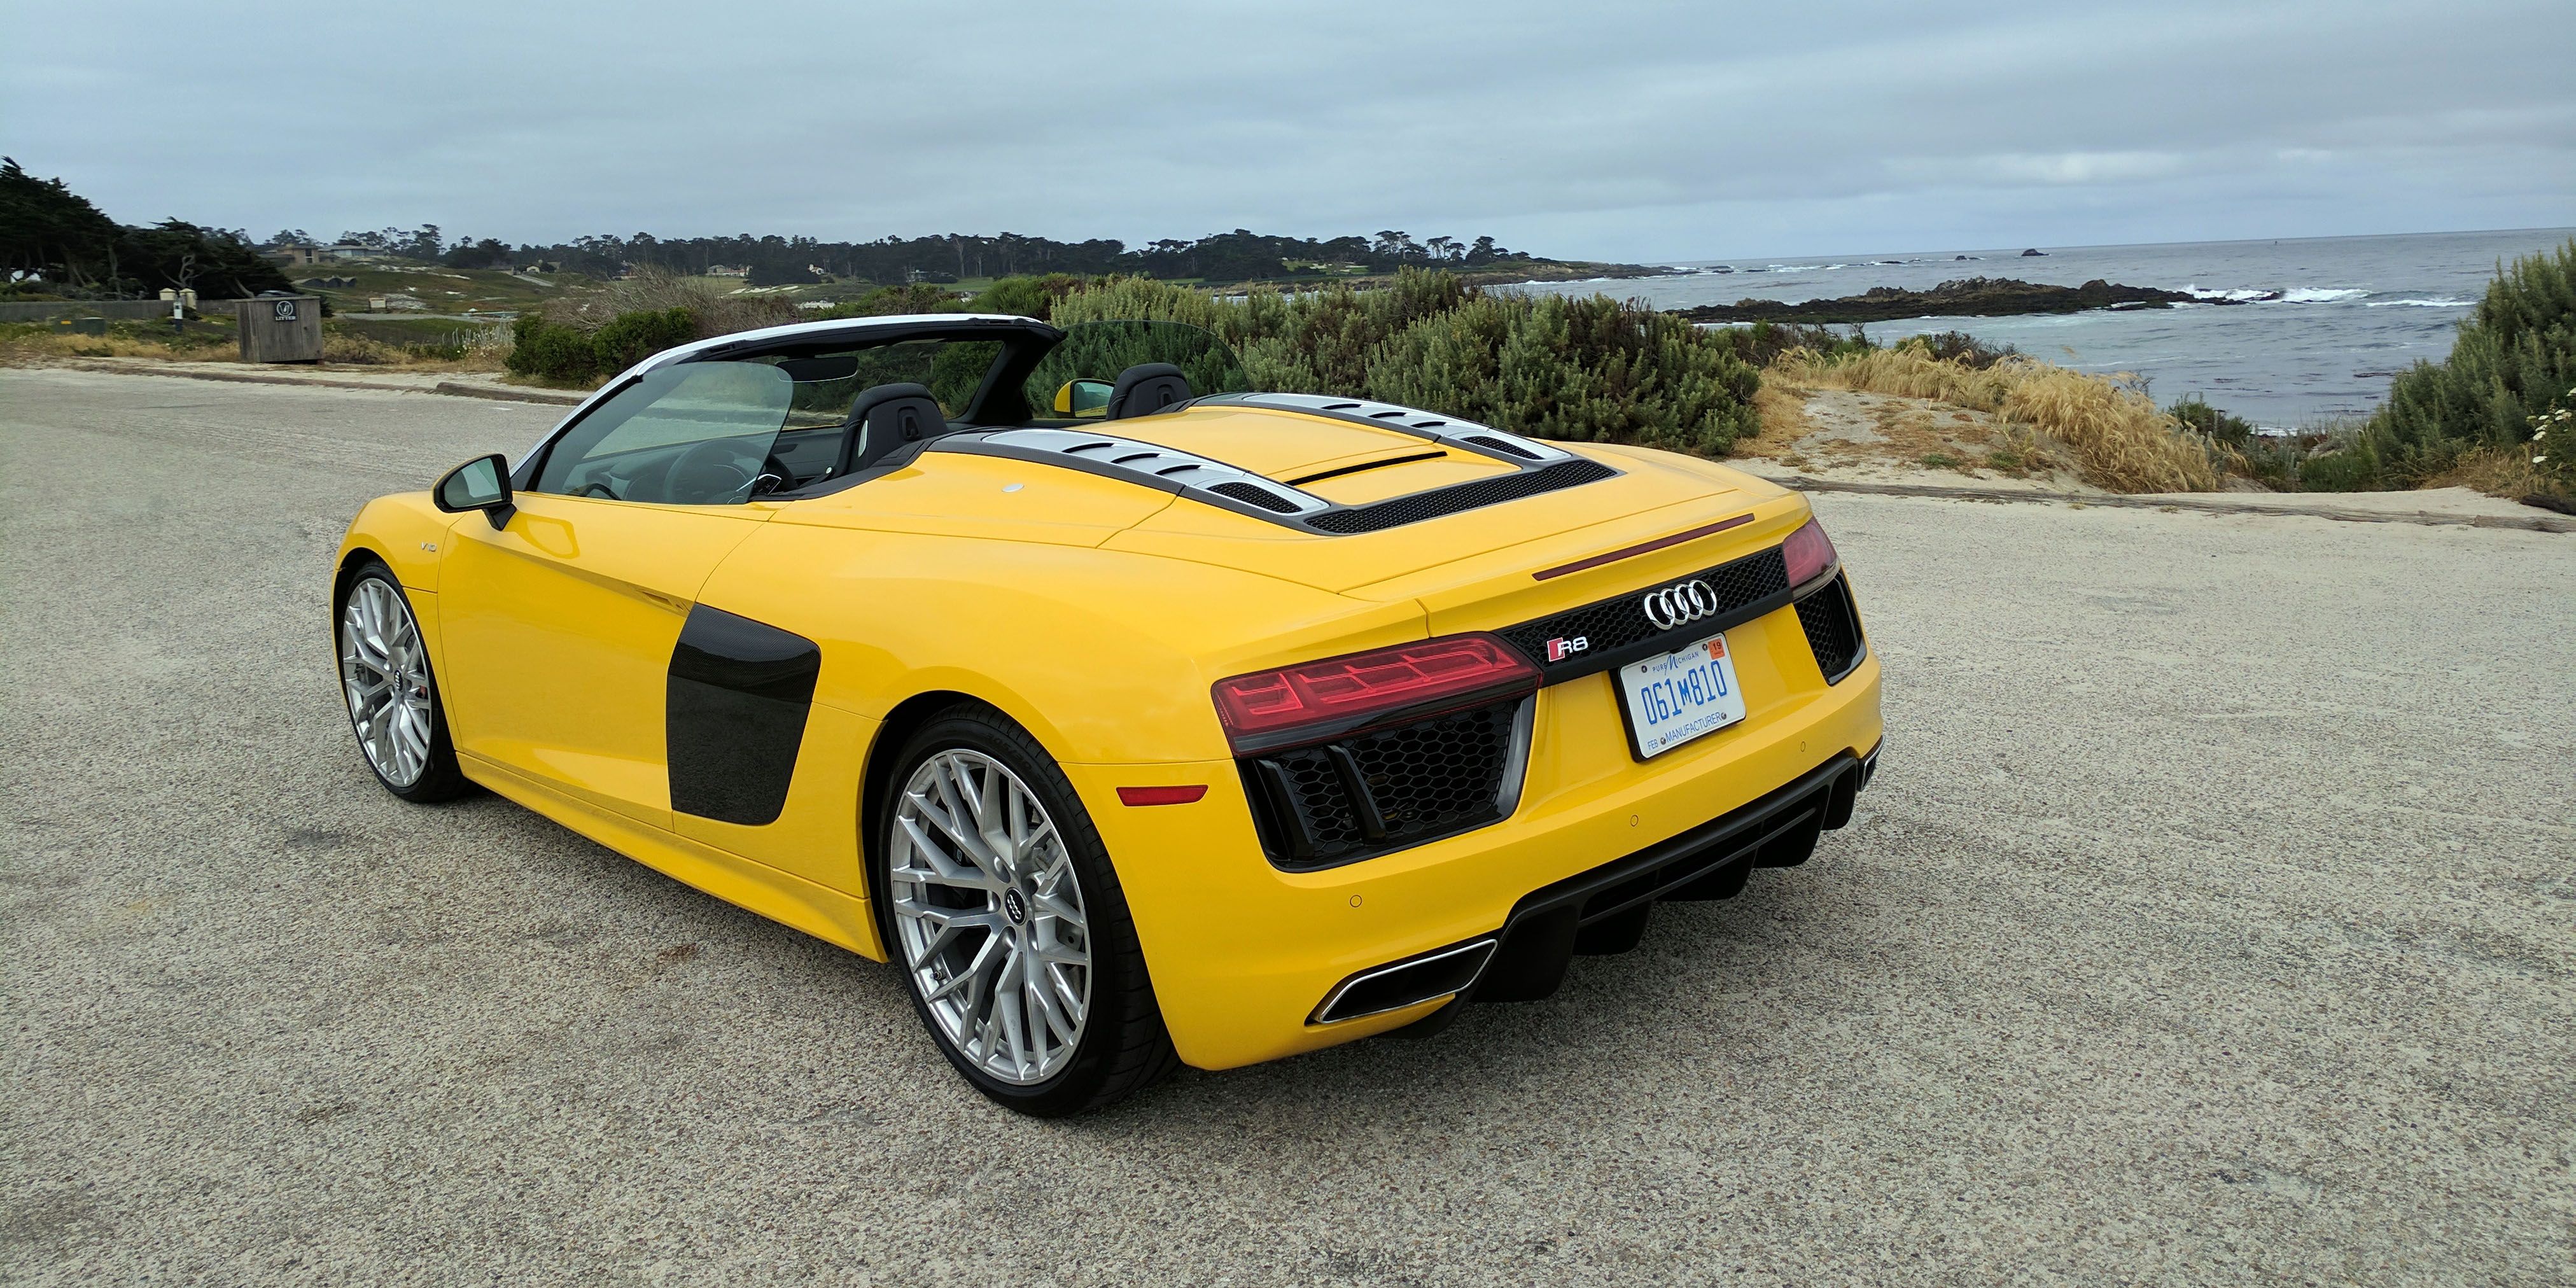 vest Motley faktor What You Learn After Driving the Audi R8 Spyder